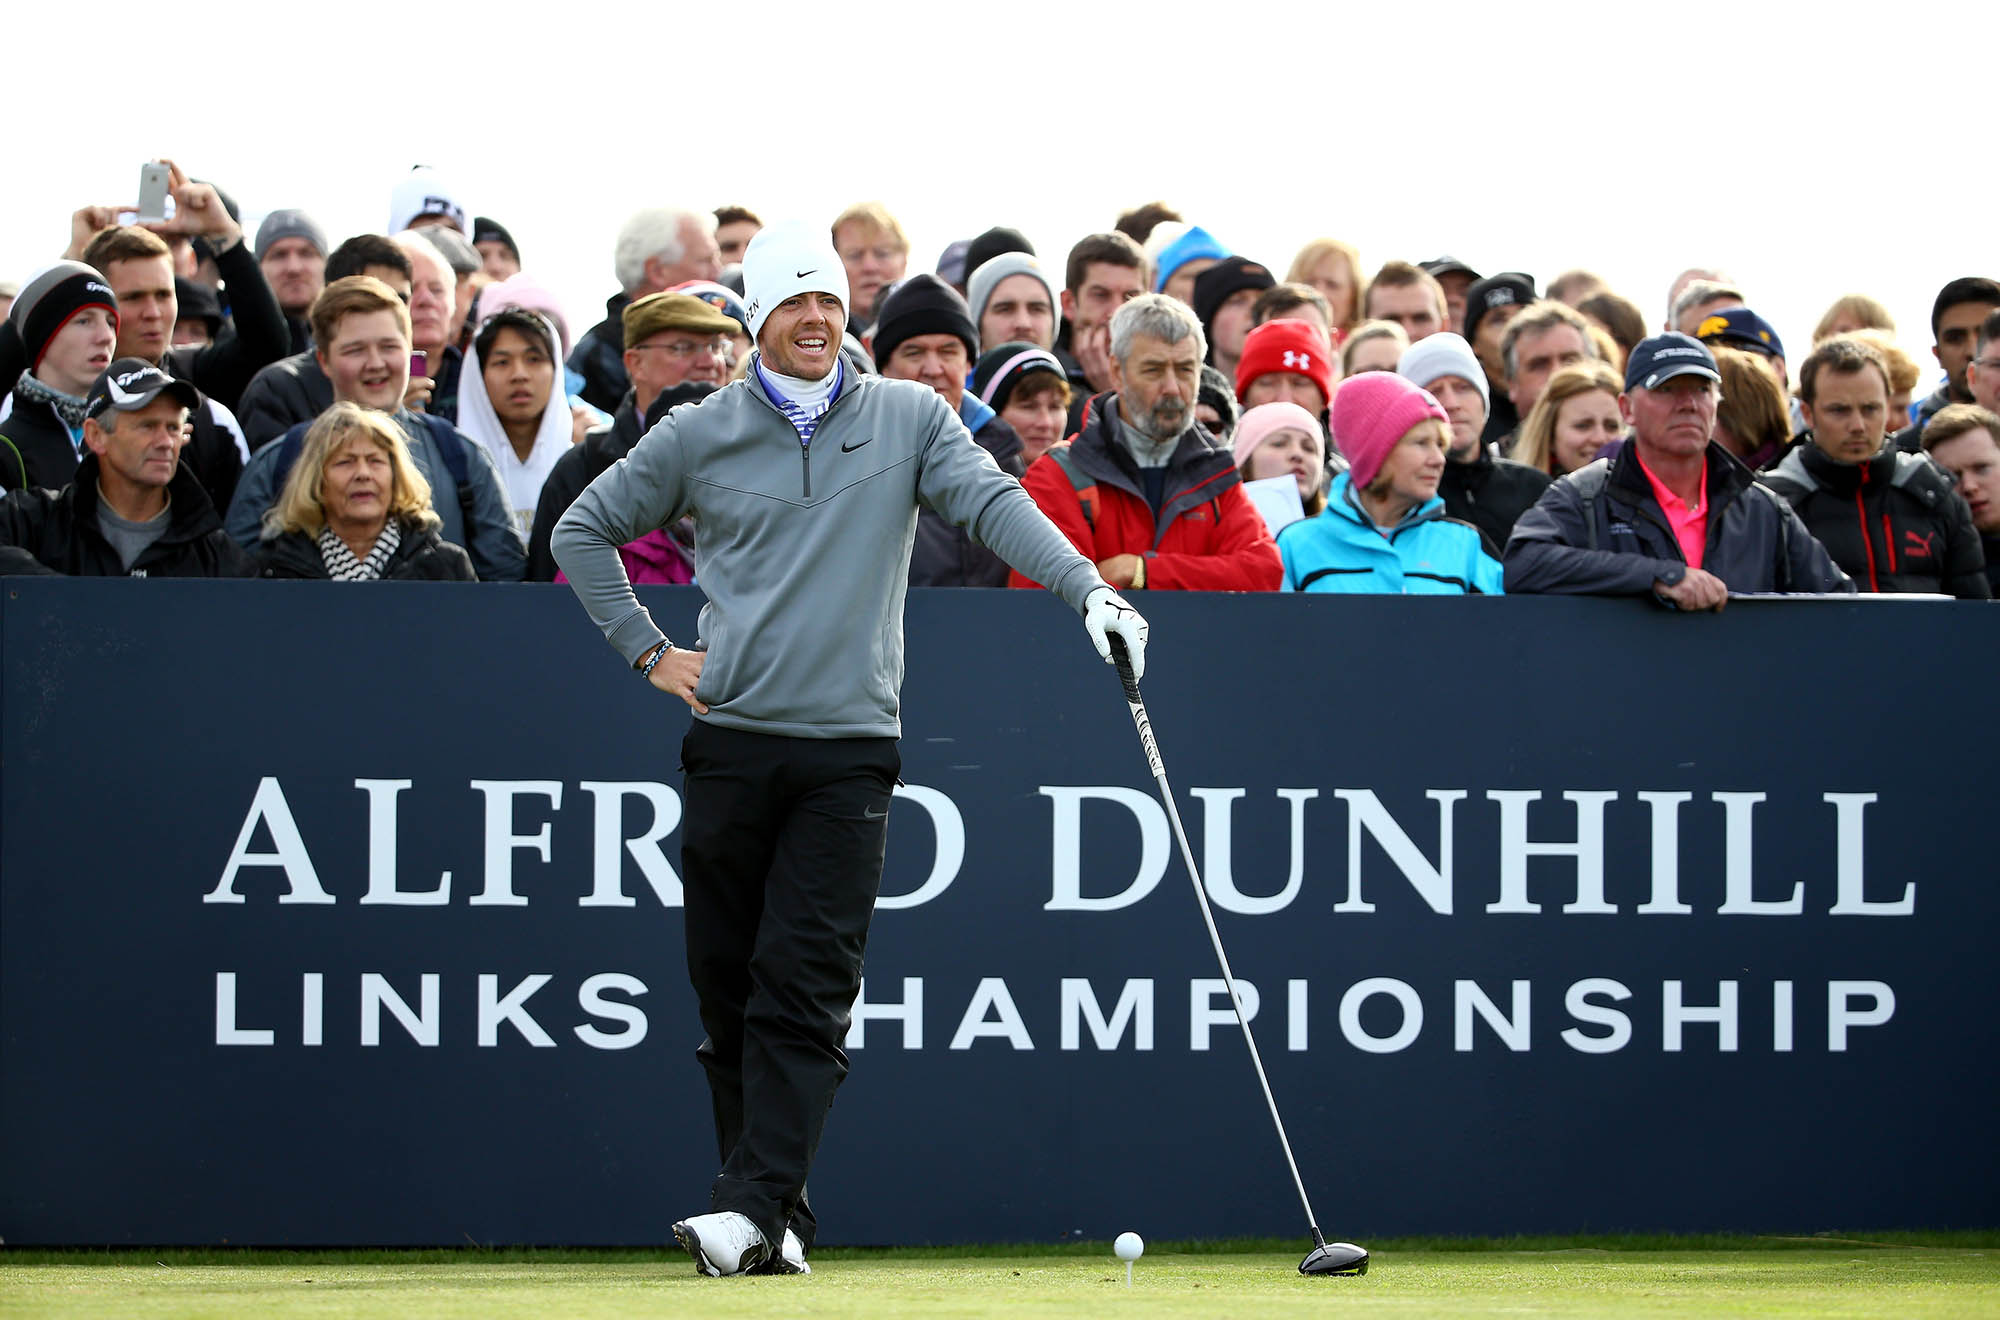 alfred dunhill links championship 2018